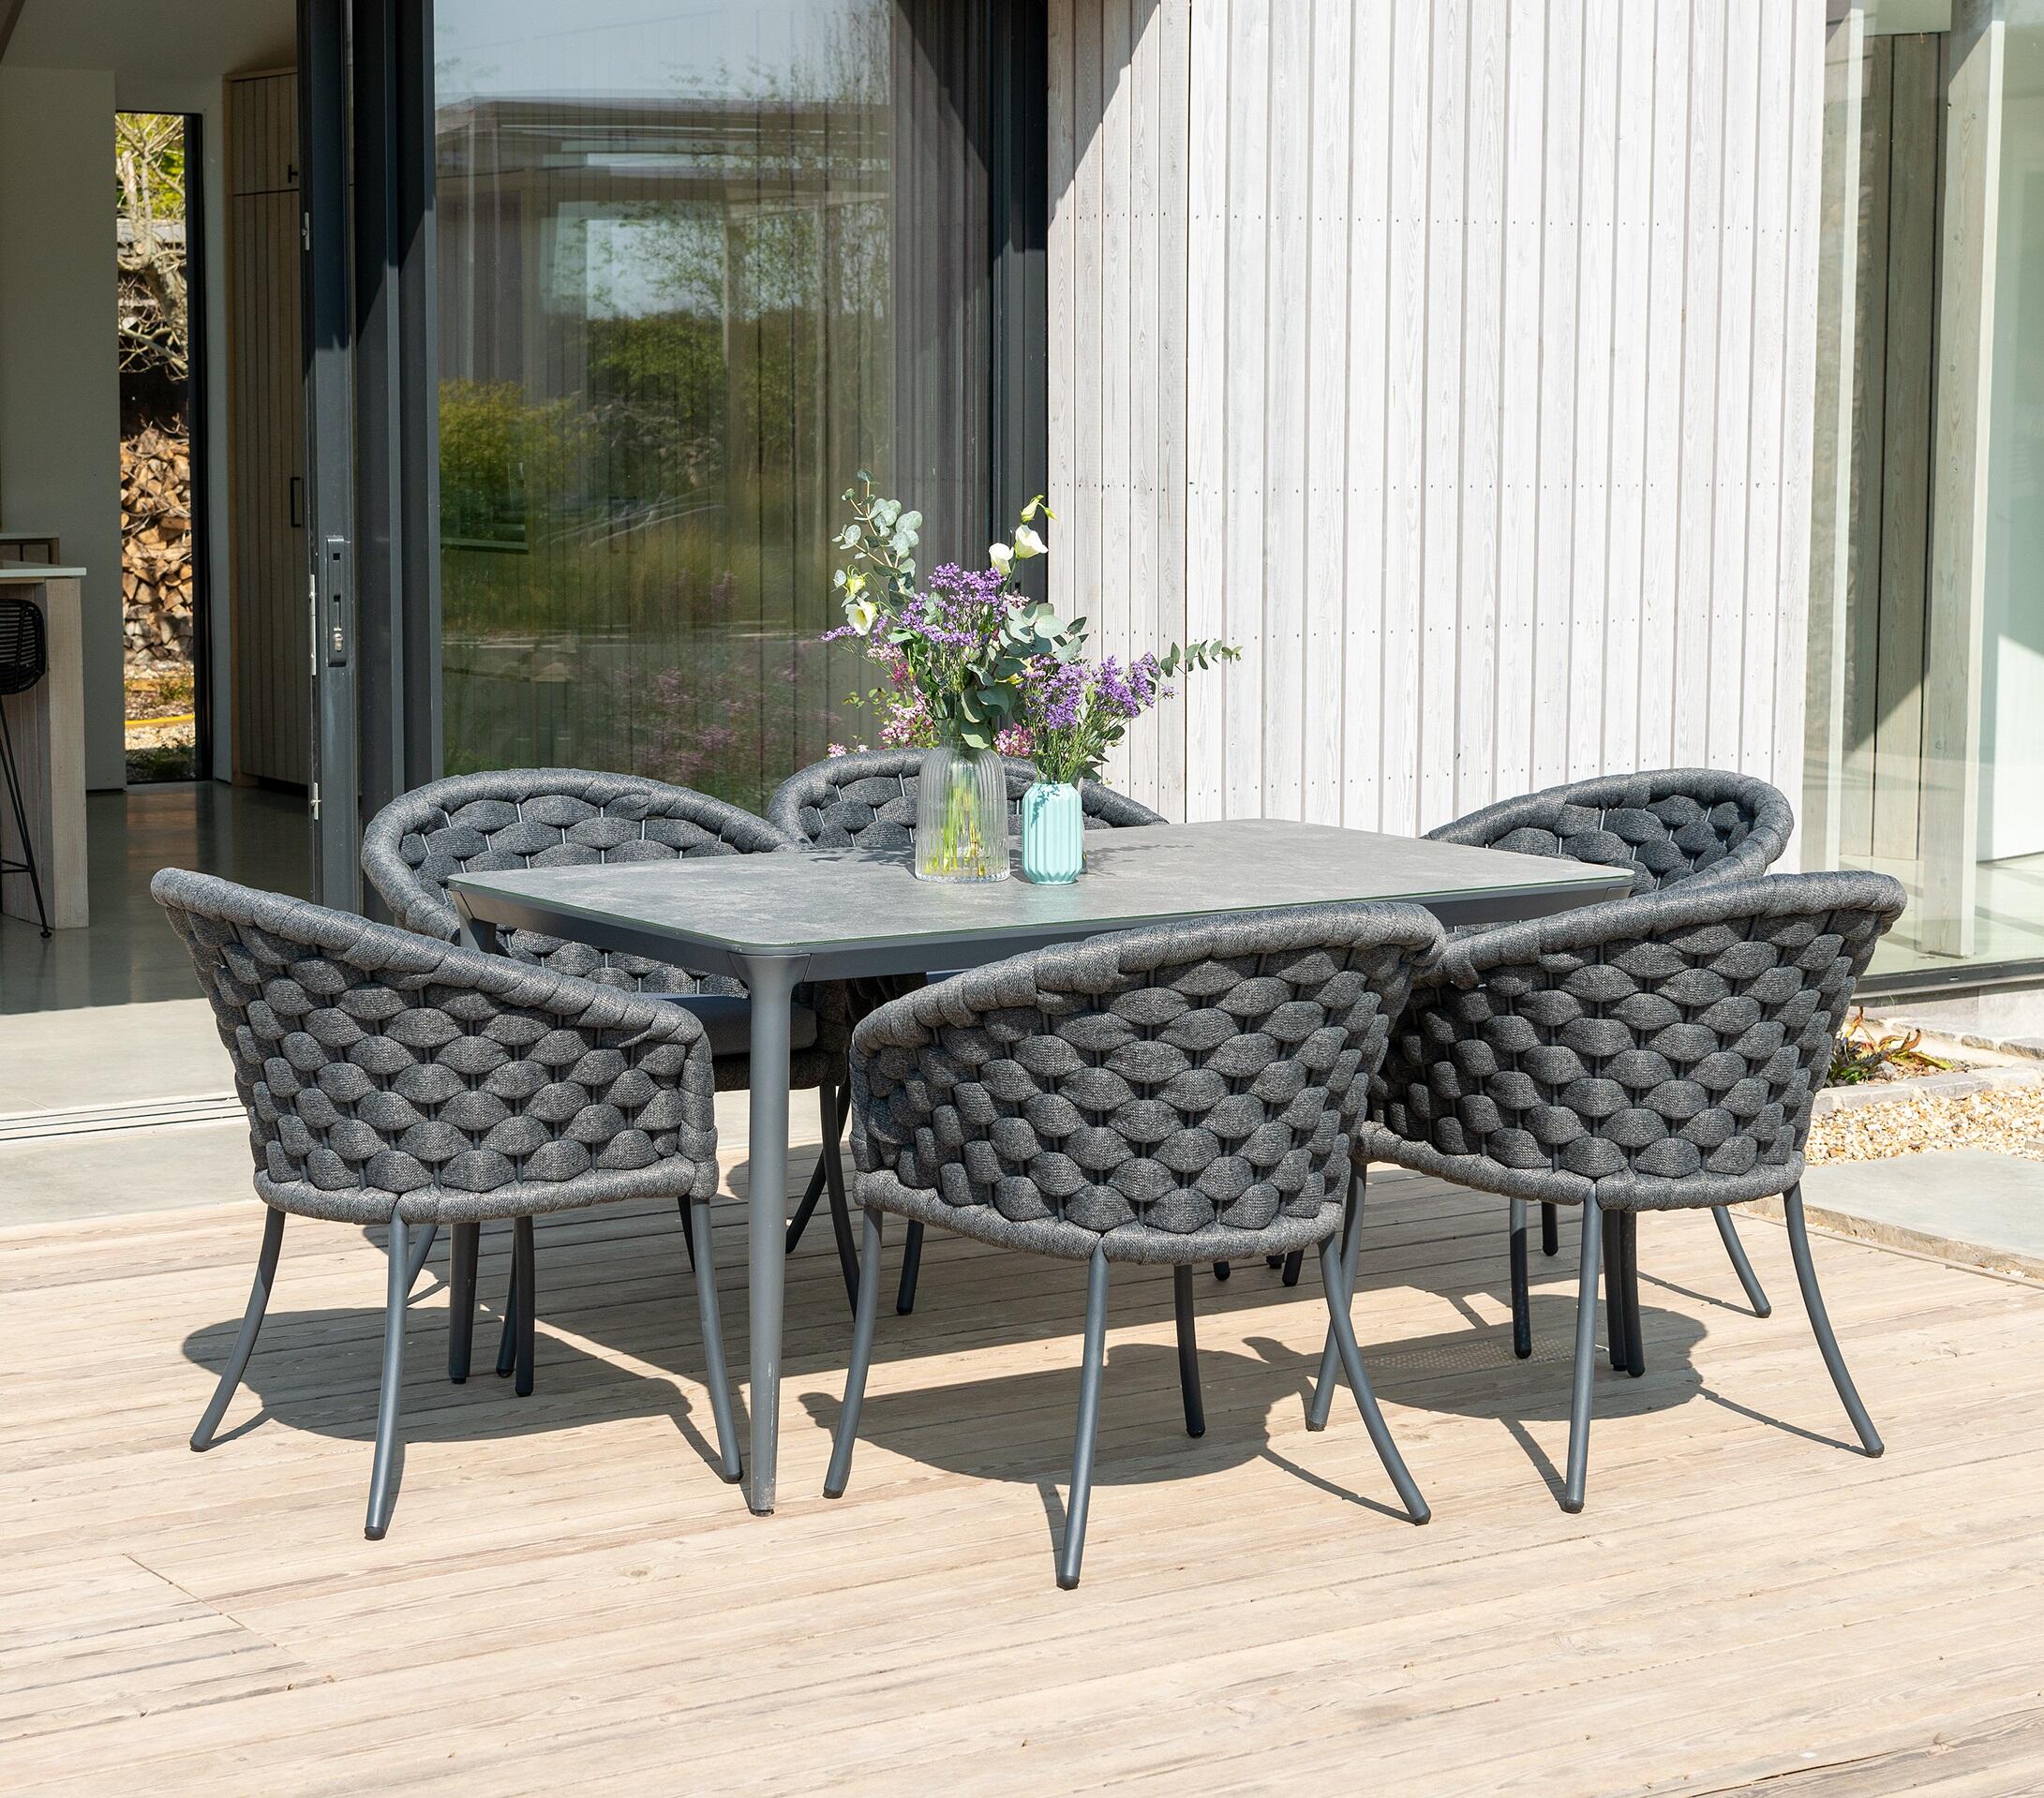 6 seater all weather wide braided rope weave garden dining chairs in dark grey with rectangle aluminium garden patio dining table